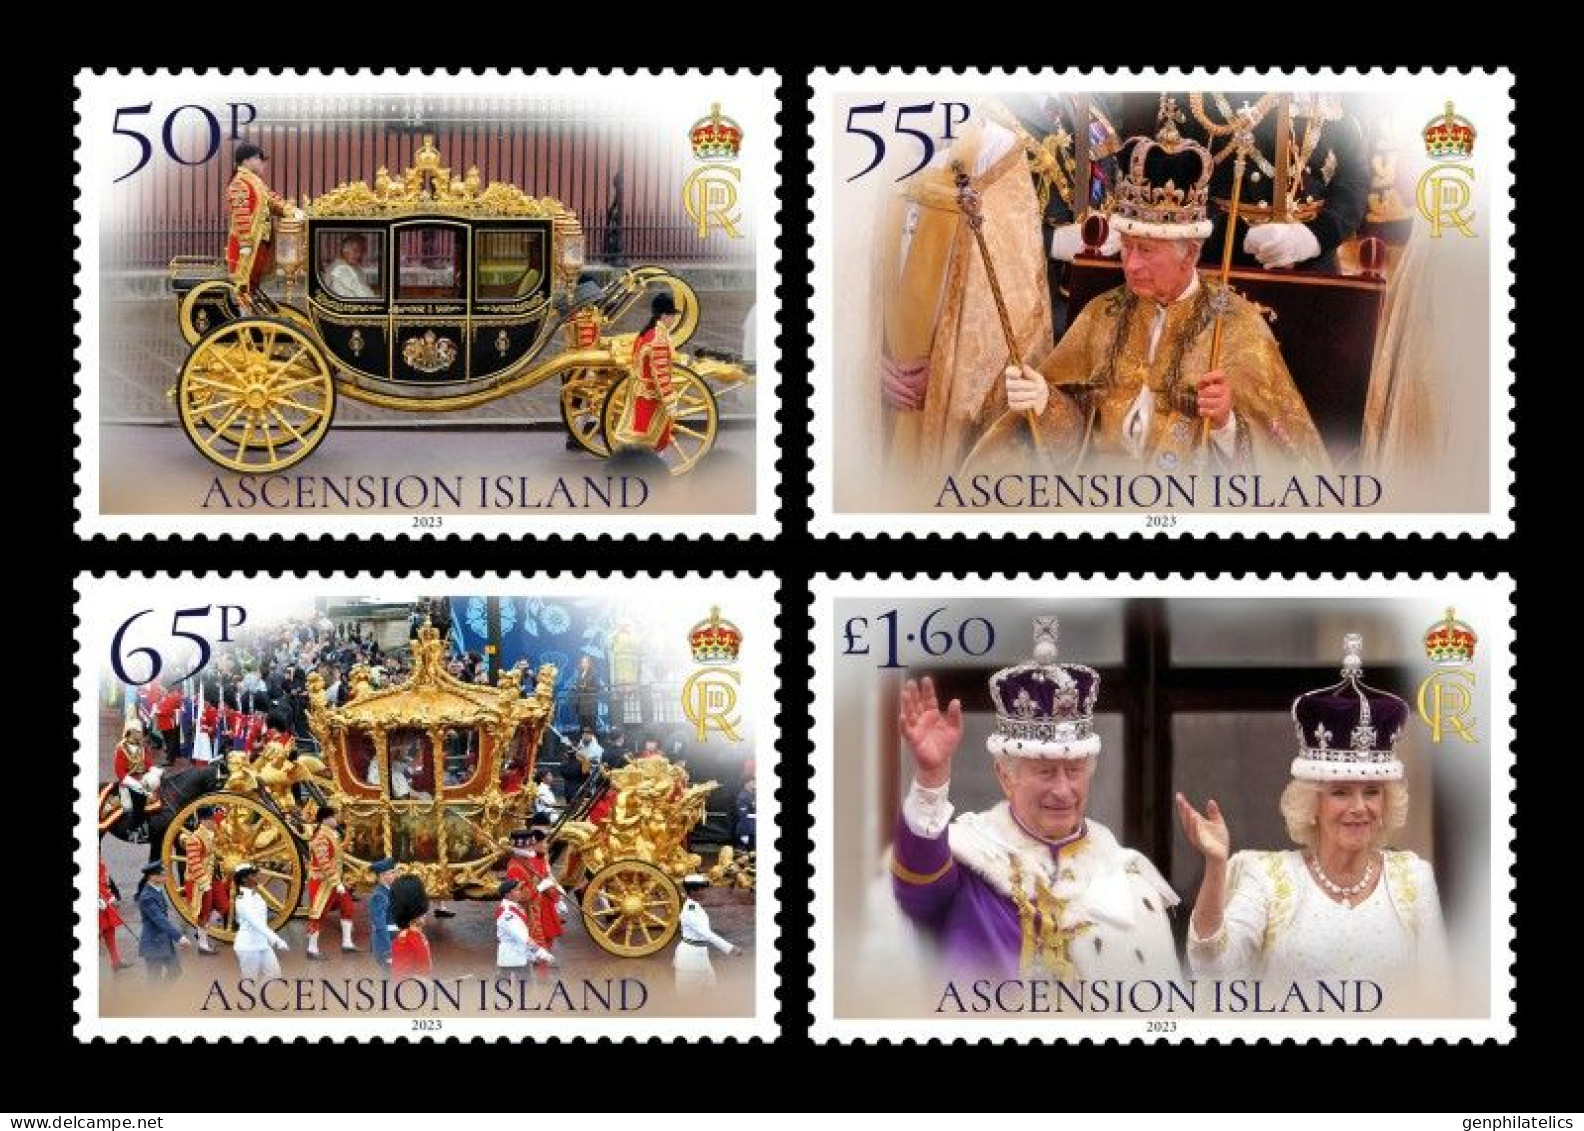 ASCENSION ISLAND 2023 PEOPLE Royalty. The Coronation Of King Charles III - Fine Set MNH - Ascension